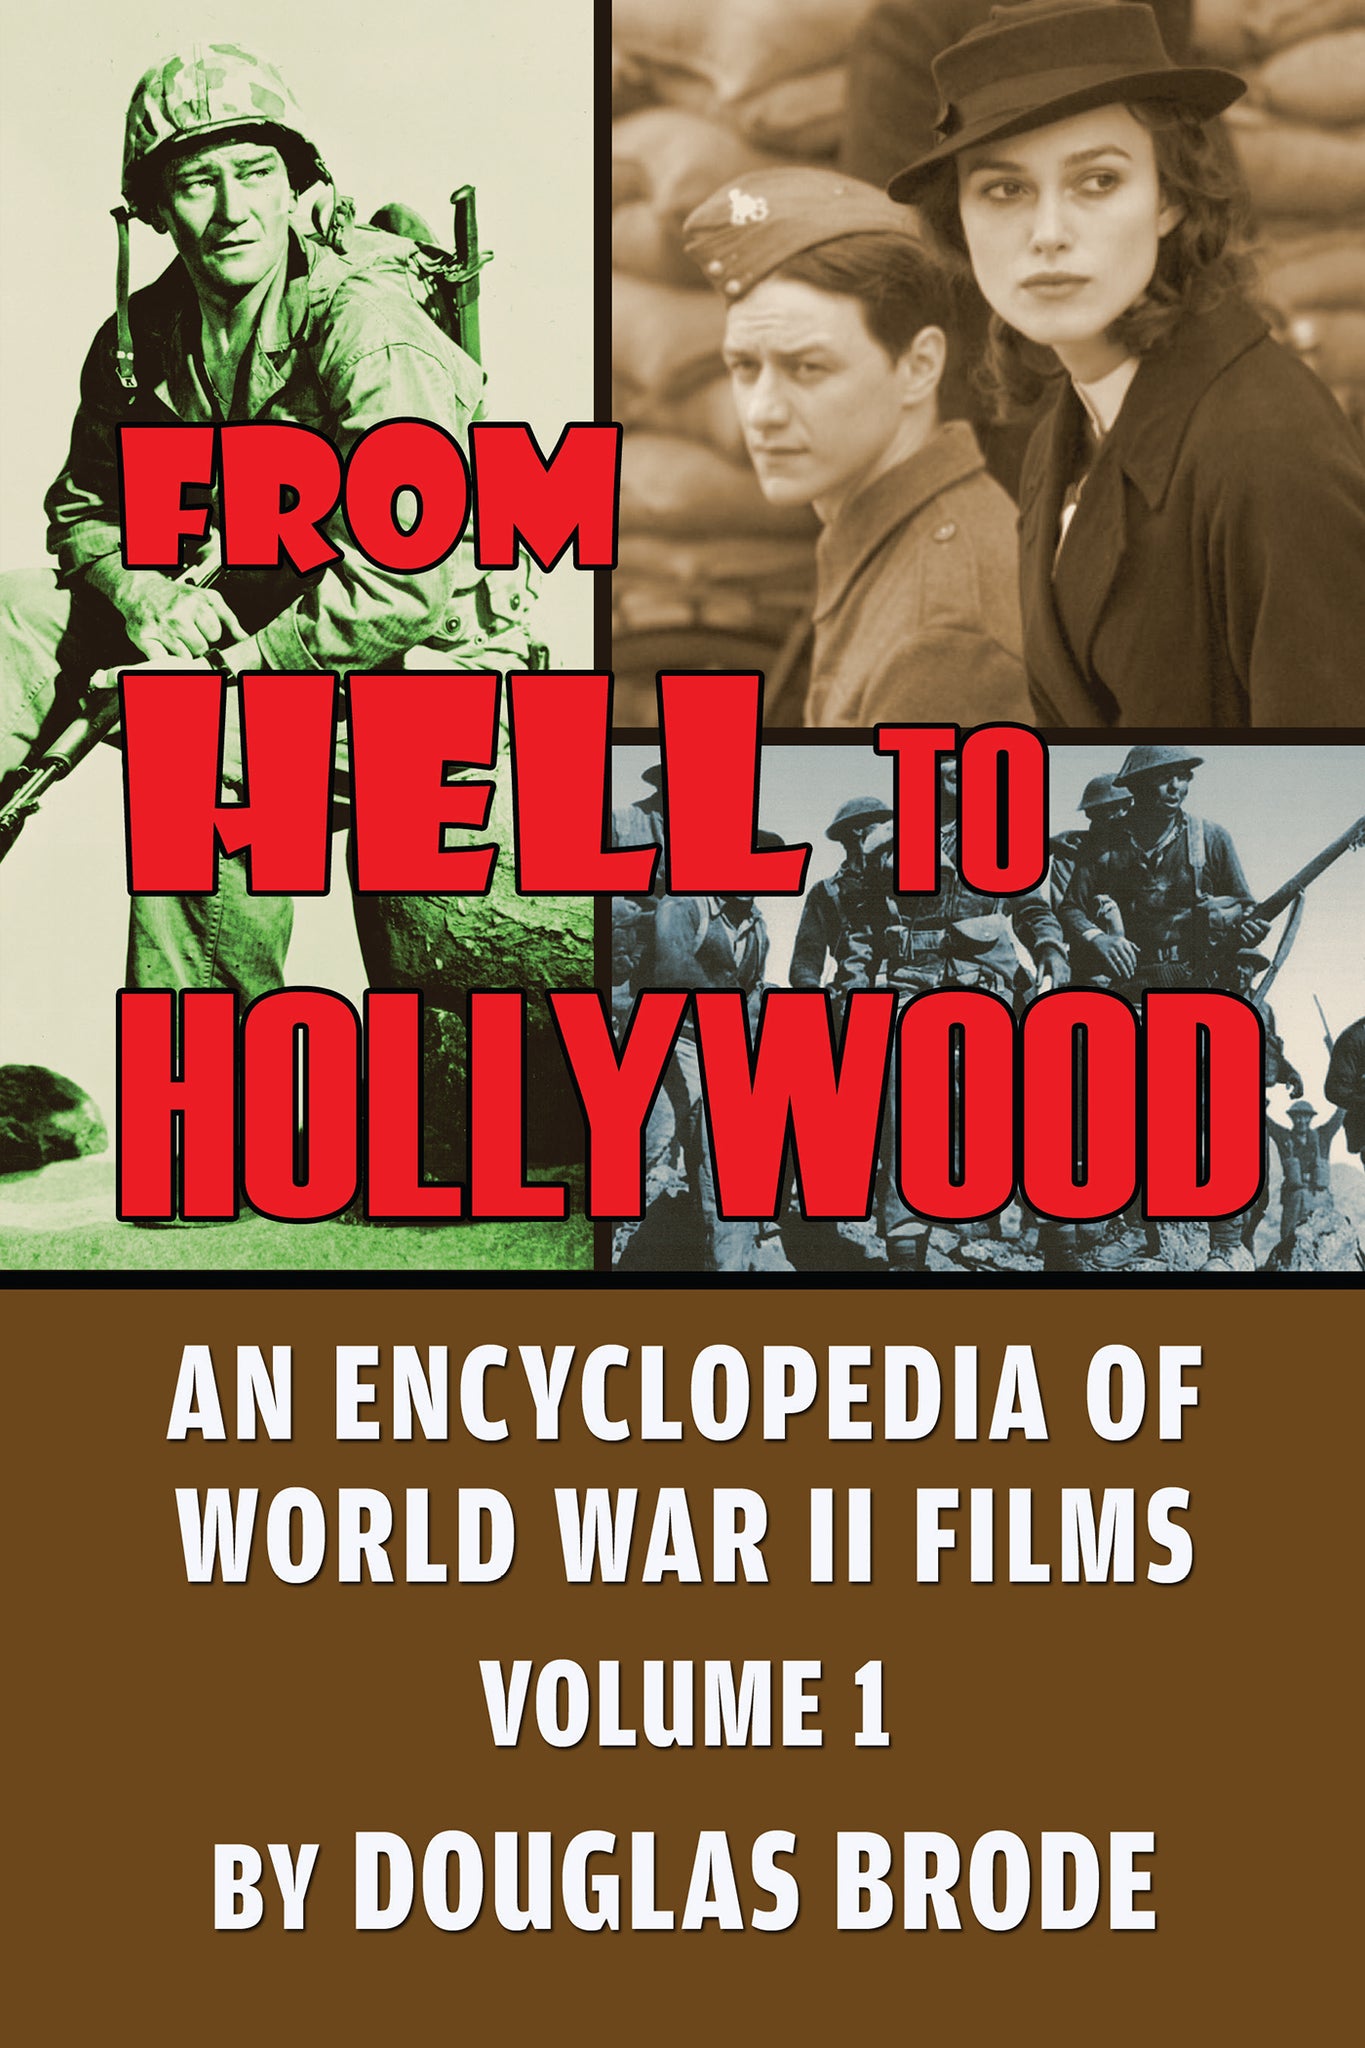 From Hell To Hollywood: An Encyclopedia of World War II Films Volume 1 (paperback) - BearManor Manor